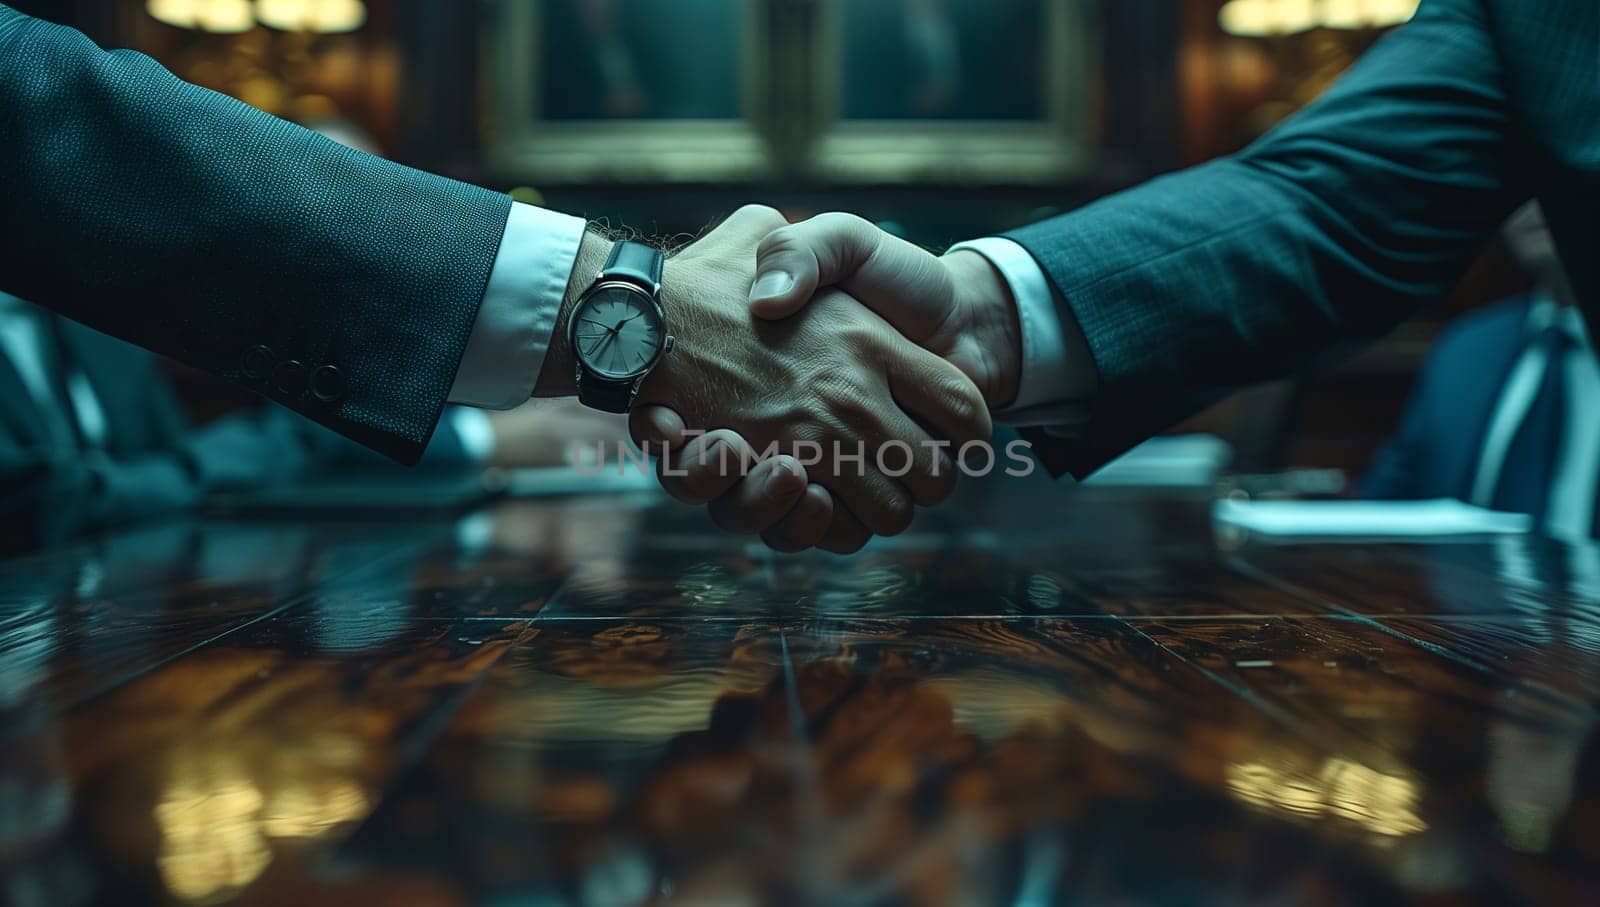 Two individuals are making a deal as they watch each others gestures, with one showcasing an electric blue wristwatch while the other reveals a fashion accessory on their wrist